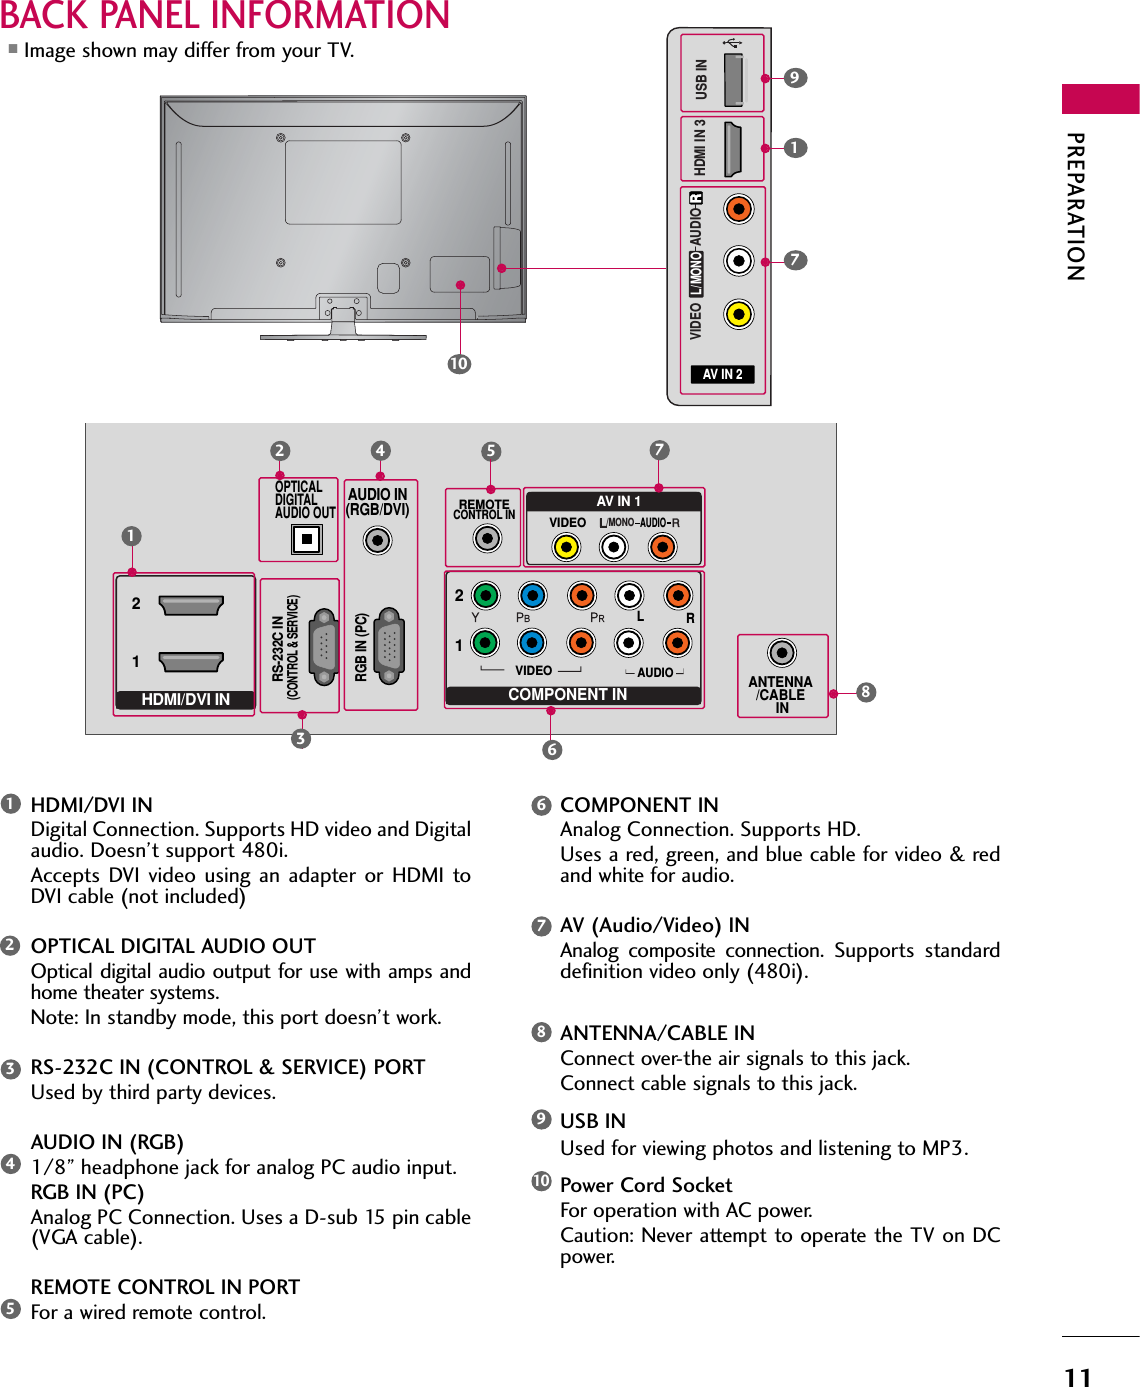 PREPARATION11■Image shown may differ from your TV.BACK PANEL INFORMATIONAV IN 2L/MONORAUDIOVIDEOUSB IN HDMI IN 3719ANTENNA/CABLE INHDMI/DVI IN 21RGB IN (PC)RS-232C IN(CONTROL &amp; SERVICE)OPTICALDIGITALAUDIO OUTAUDIO IN(RGB/DVI)COMPONENT IN12VIDEOAUDIOLRREMOTECONTROL INAV IN 1AUDIOVIDEO/MONO12HDMI/DVI INDigital Connection. Supports HD video and Digitalaudio. Doesn’t support 480i. Accepts DVI video using an adapter or HDMI toDVI cable (not included)OPTICAL DIGITAL AUDIO OUTOptical digital audio output for use with amps andhome theater systems. Note: In standby mode, this port doesn’t work.RS-232C IN (CONTROL &amp; SERVICE) PORTUsed by third party devices.AUDIO IN (RGB)1/8” headphone jack for analog PC audio input.RGB IN (PC)Analog PC Connection. Uses a D-sub 15 pin cable(VGA cable).REMOTE CONTROL IN PORTFor a wired remote control.COMPONENT INAnalog Connection. Supports HD. Uses a red, green, and blue cable for video &amp; redand white for audio.AV (Audio/Video) INAnalog composite connection. Supports standarddefinition video only (480i).ANTENNA/CABLE INConnect over-the air signals to this jack.Connect cable signals to this jack.USB INUsed for viewing photos and listening to MP3.Power Cord SocketFor operation with AC power. Caution: Never attempt to operate the TV on DCpower.1234591086734578106